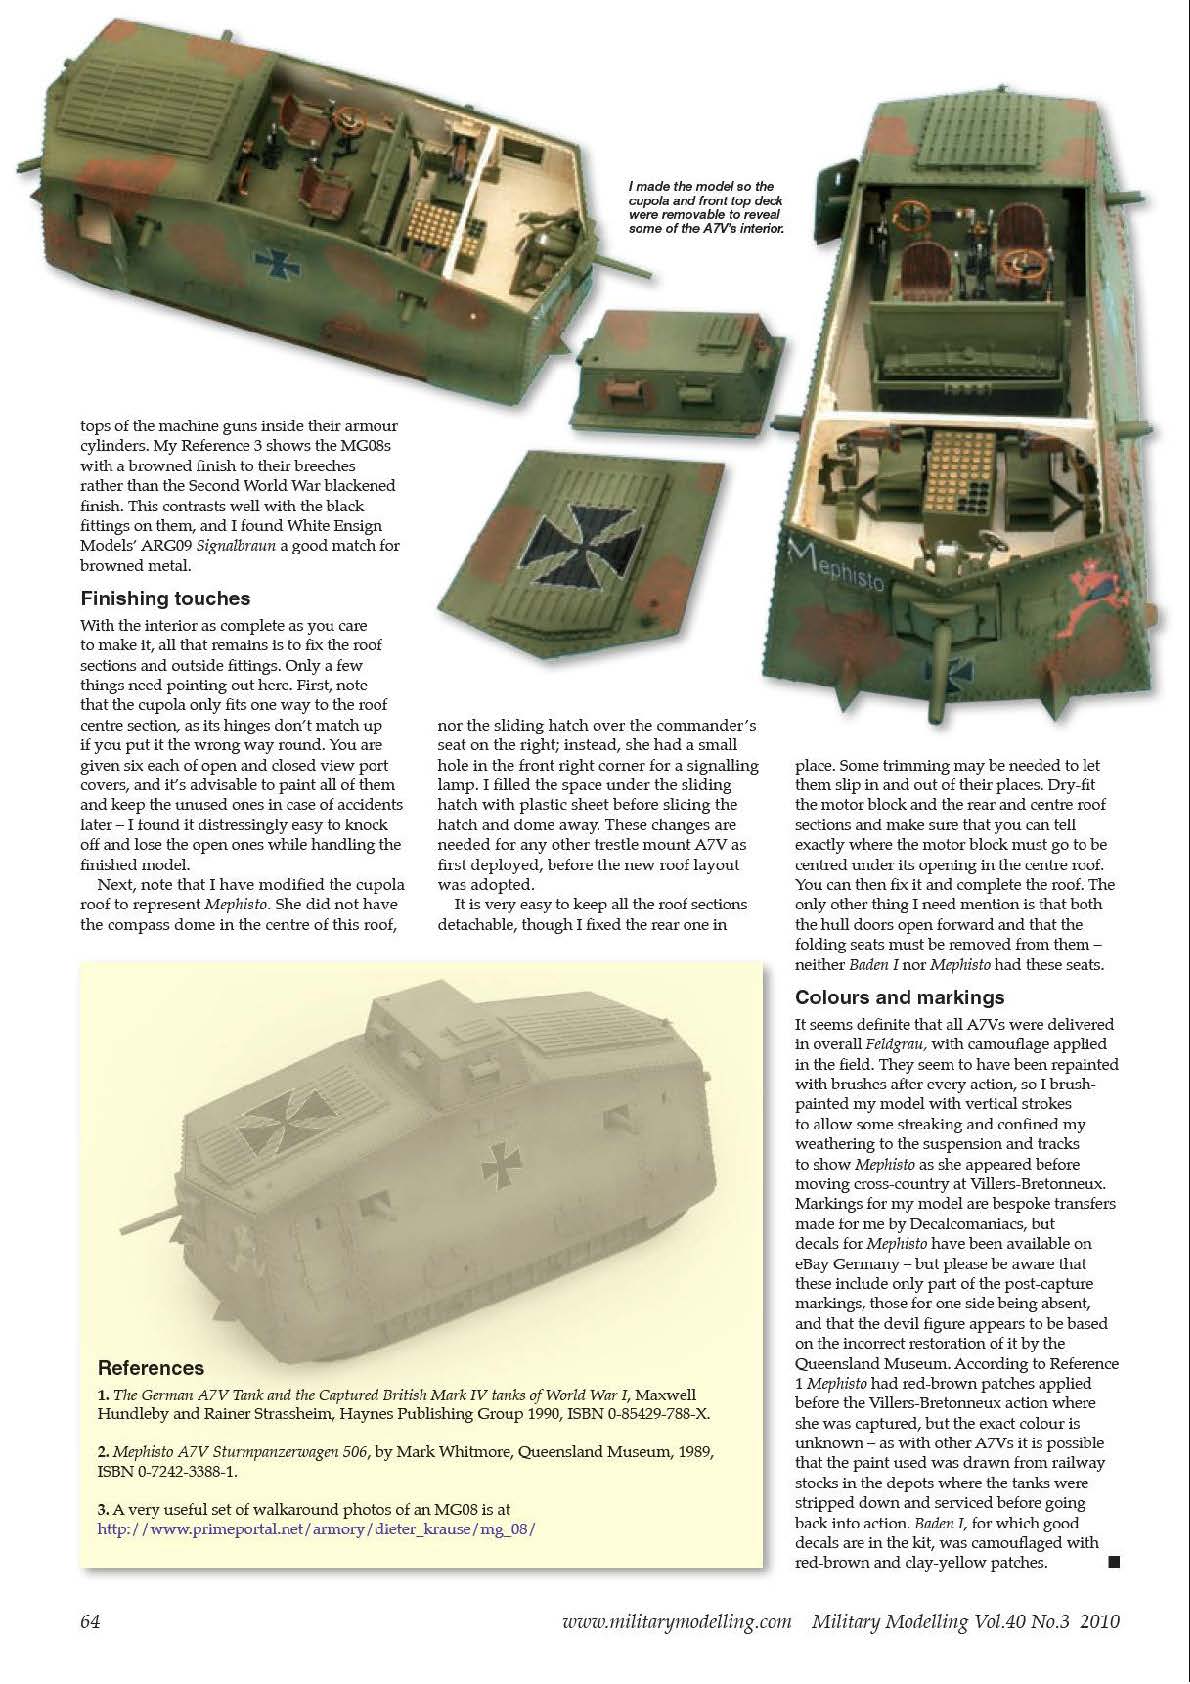 Military Modelling Special Collectors` Edition Nine (Vol.40 Iss.3) [2010]-2_Страница_09.jpg